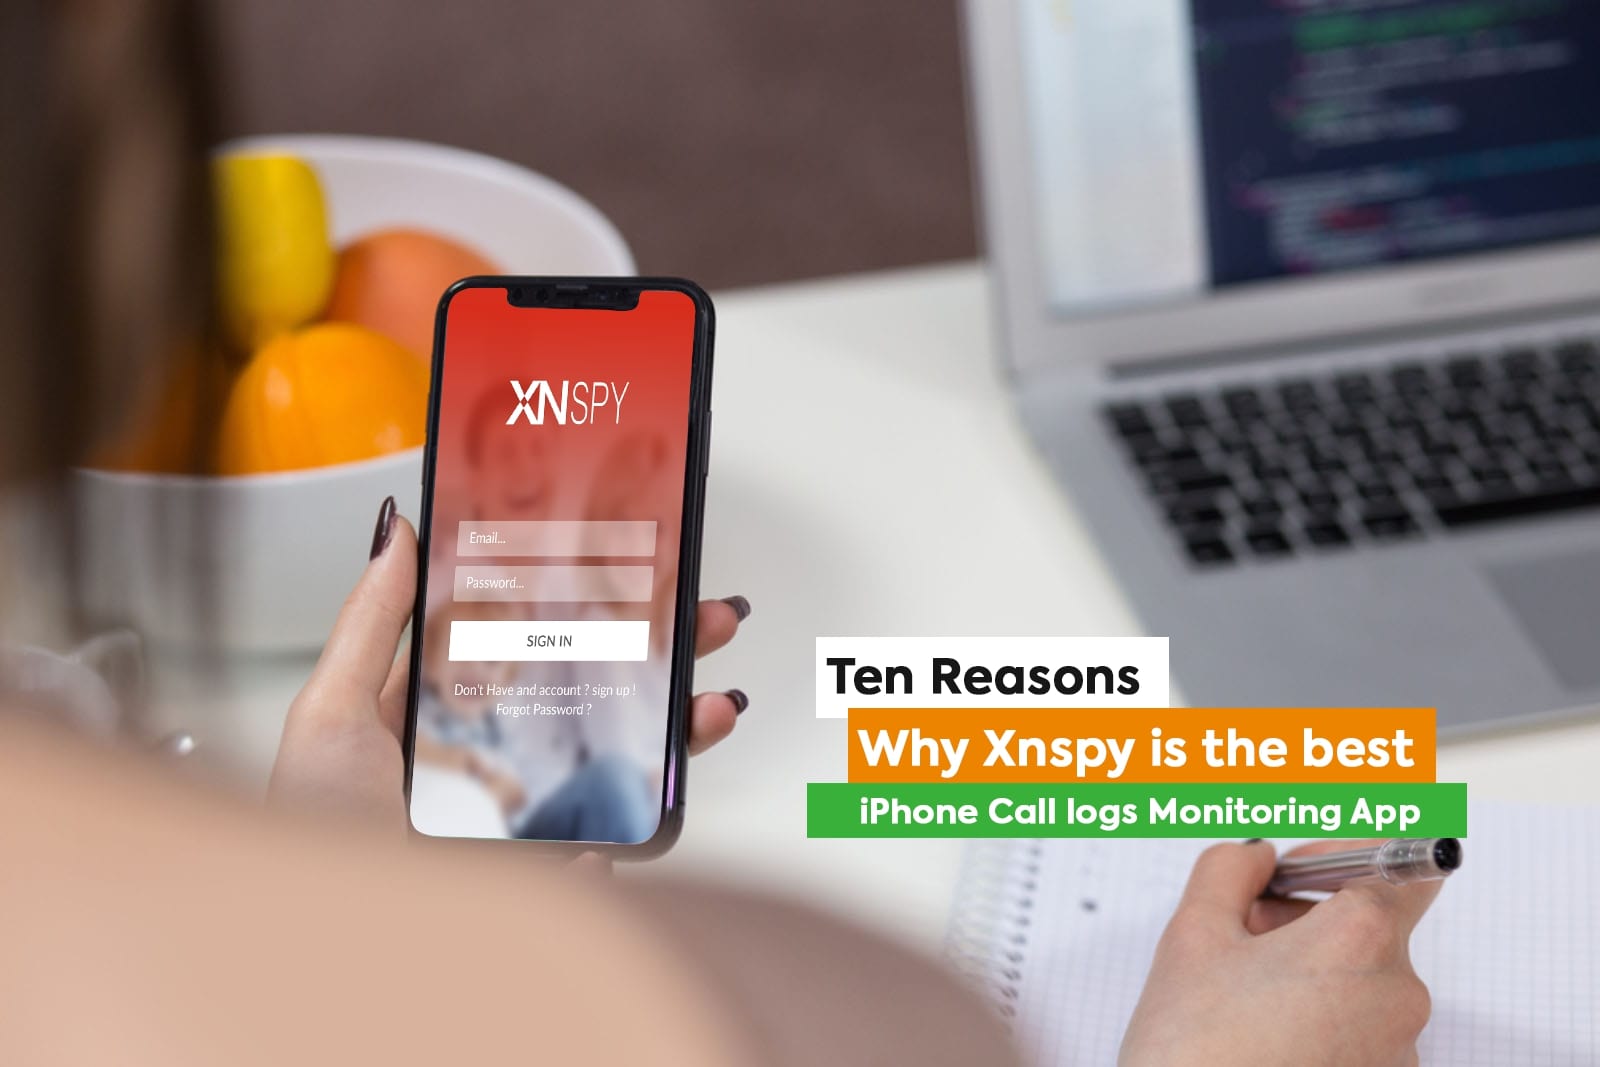 Ten Reasons Why XNSPY Is The Best iPhone Call logs Monitoring App